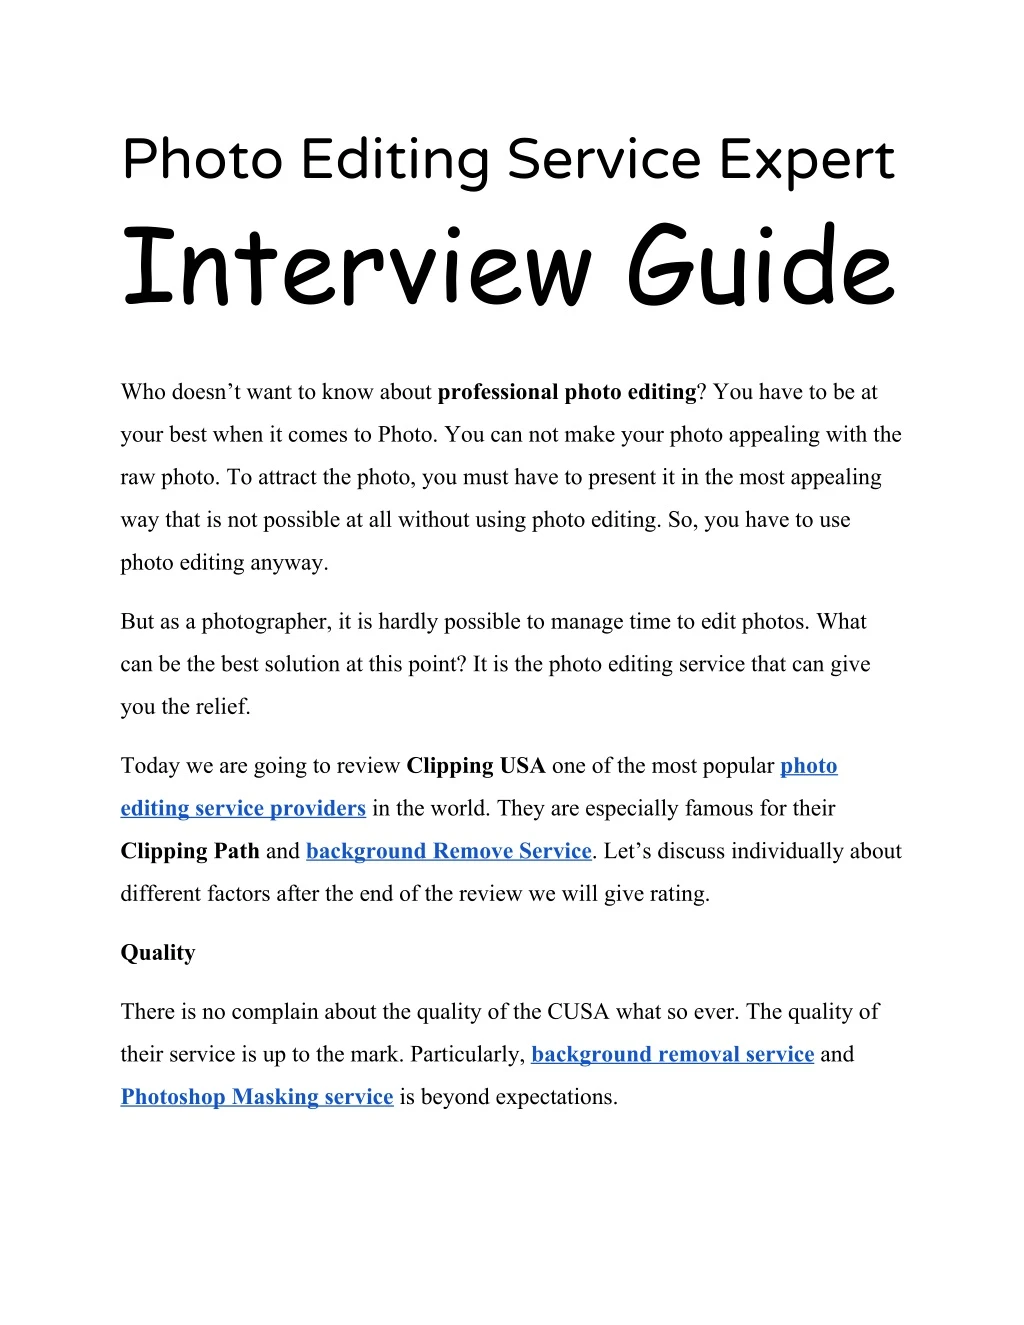 photo editing service expert interview guide